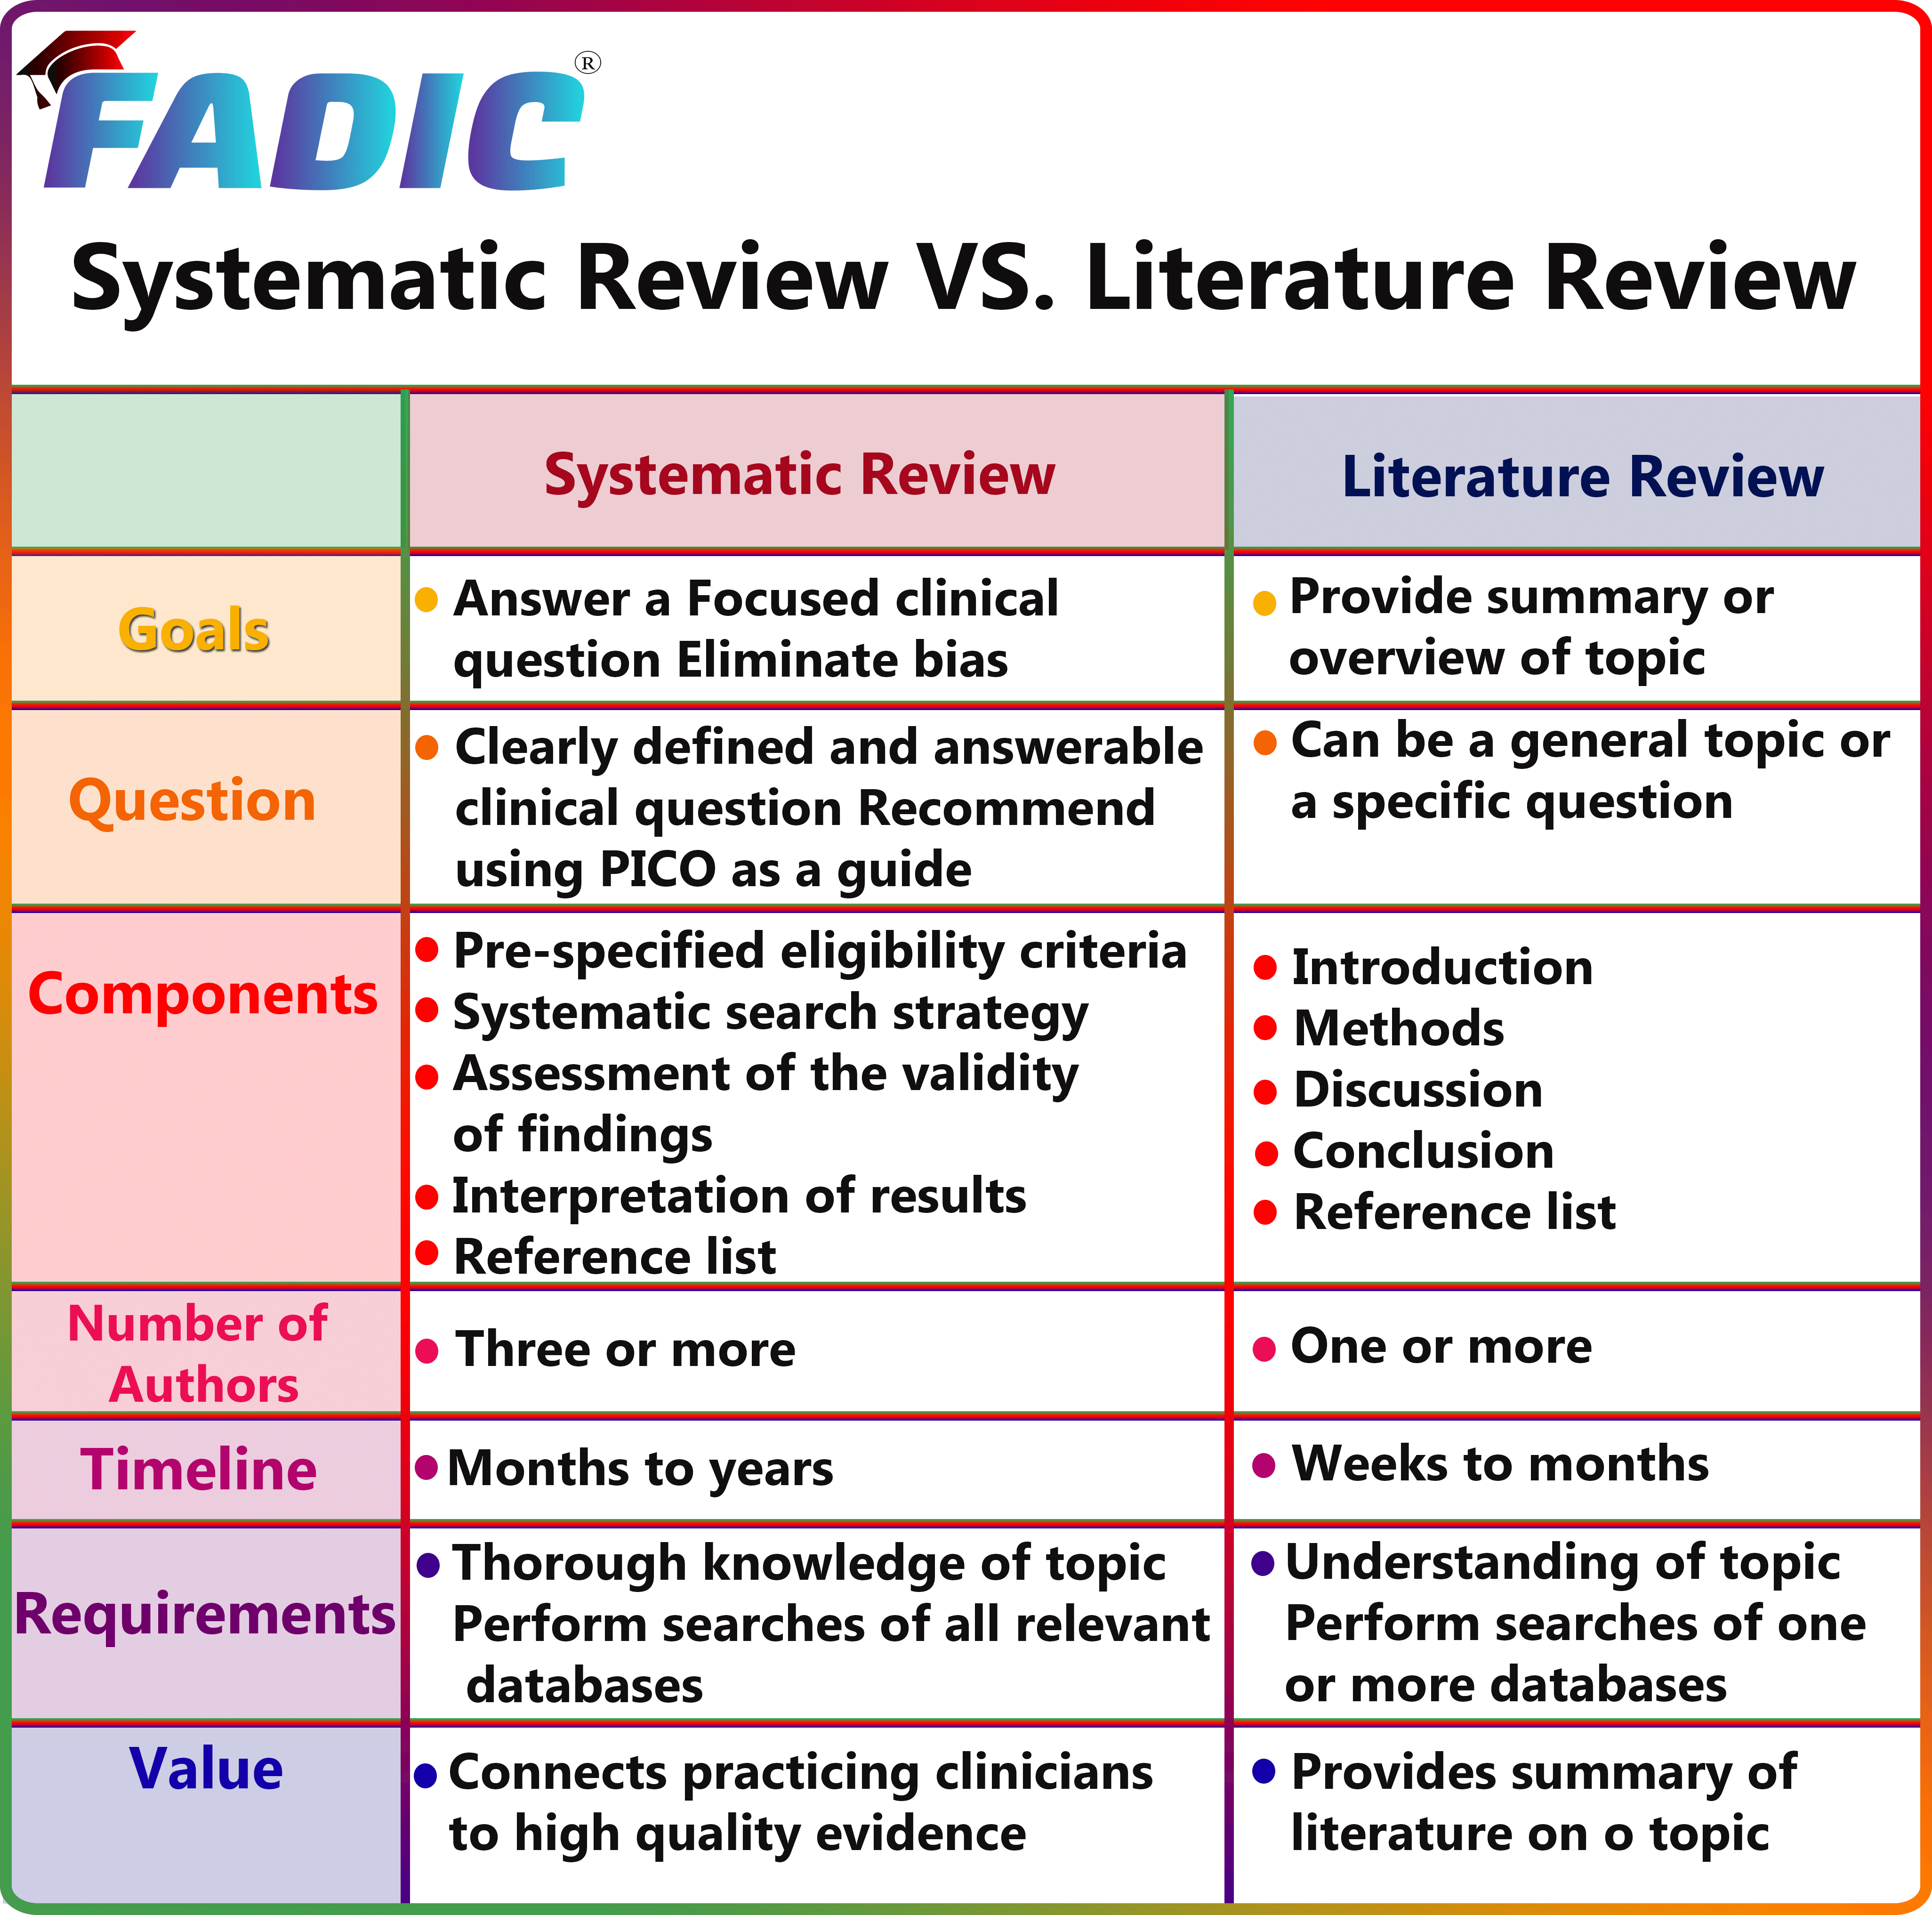 systematic literature review online course